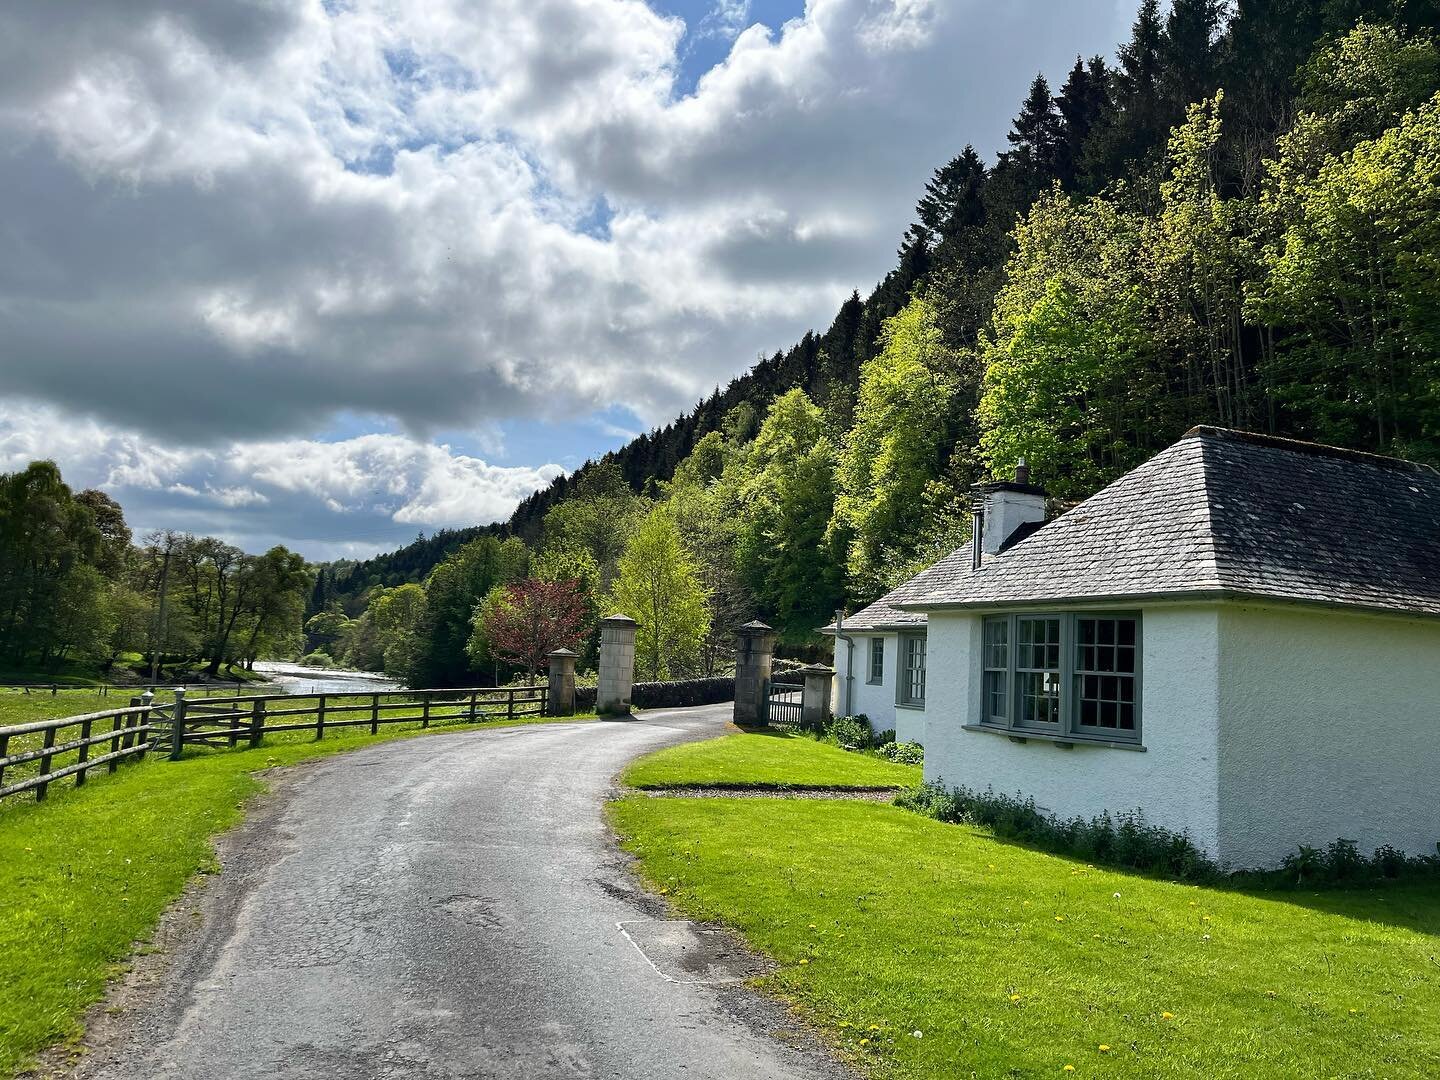 The Lodge - with an outlook across a field of buttercups to the River Tweed and a stream running under the cottage, The Lodge makes a charming retreat for anyone wanting to escape the hustle and bustle 
.
.
.
#thelodge #theyairscotland #ruralescape #